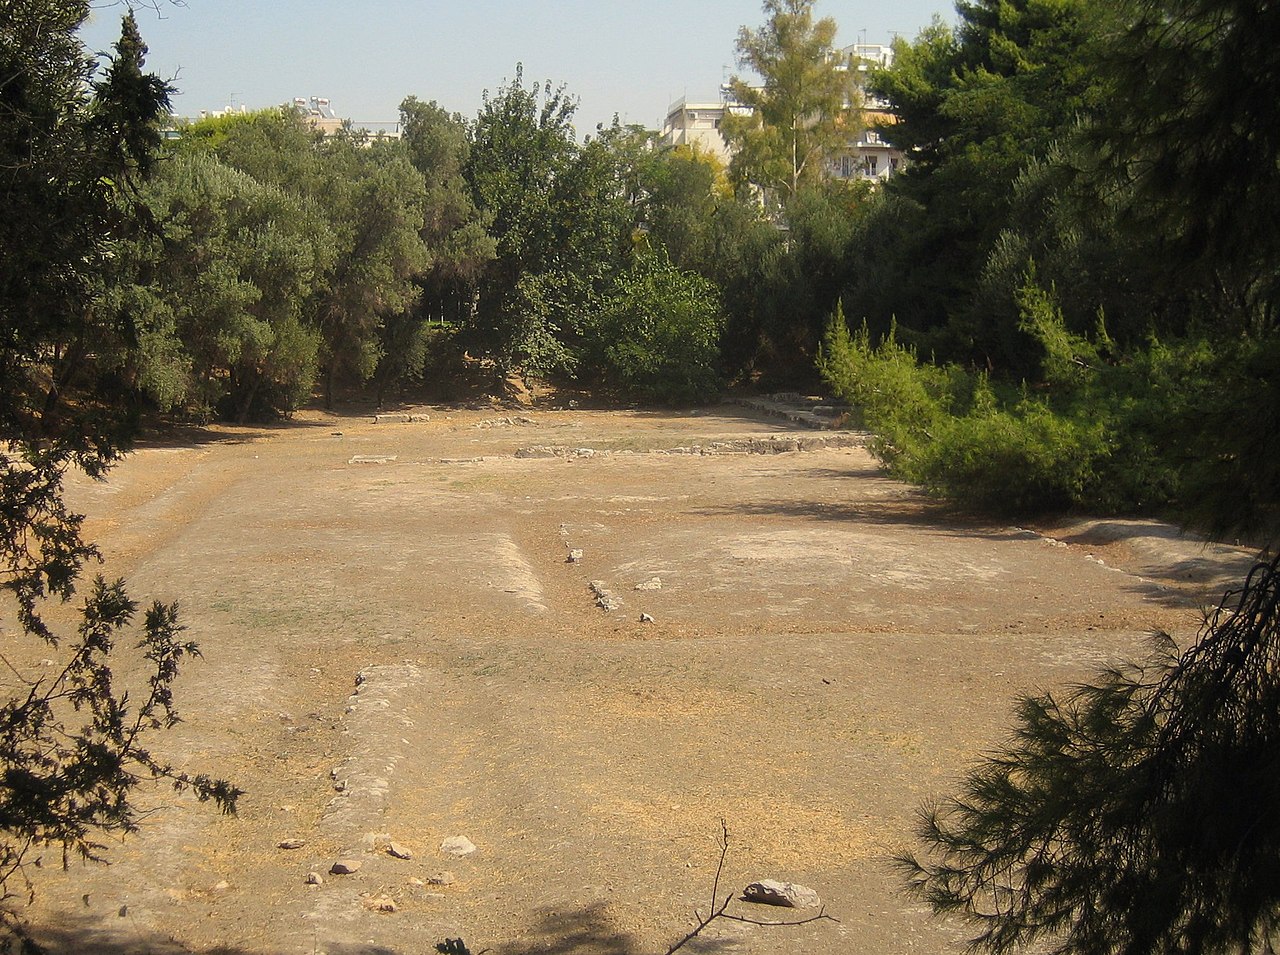 The site of the ancient Academy where philosophical heavyweights like Socrates and Plato learned and taught.